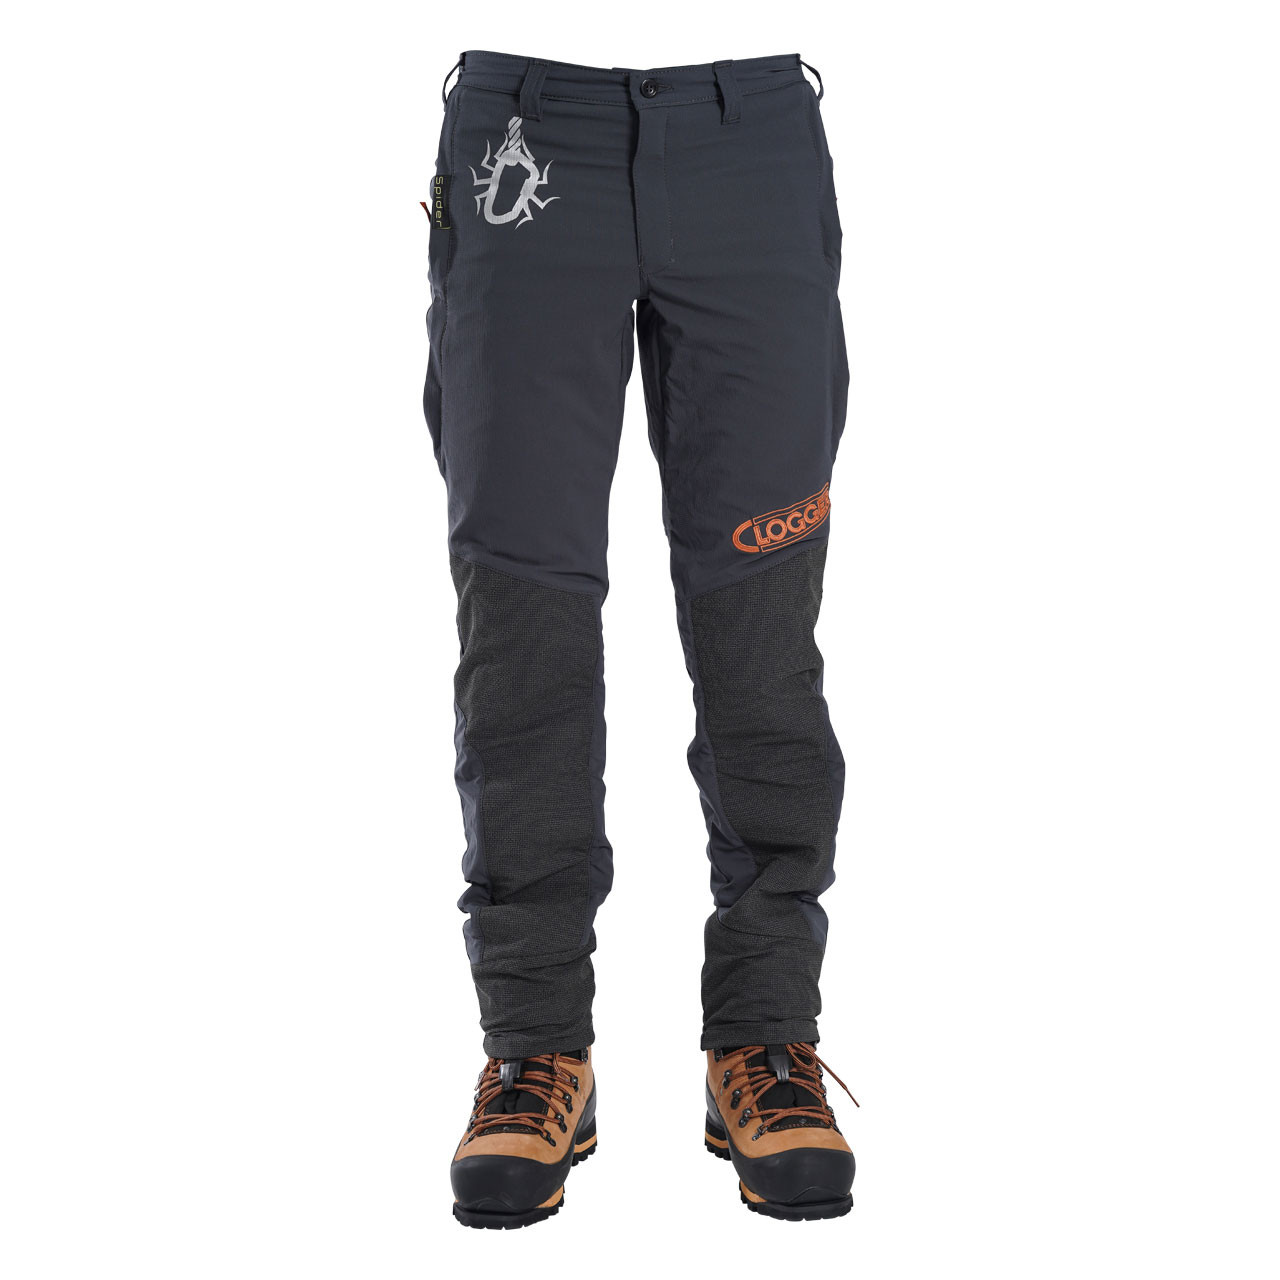 Clogger Spider Women's Climbing and Work Pants